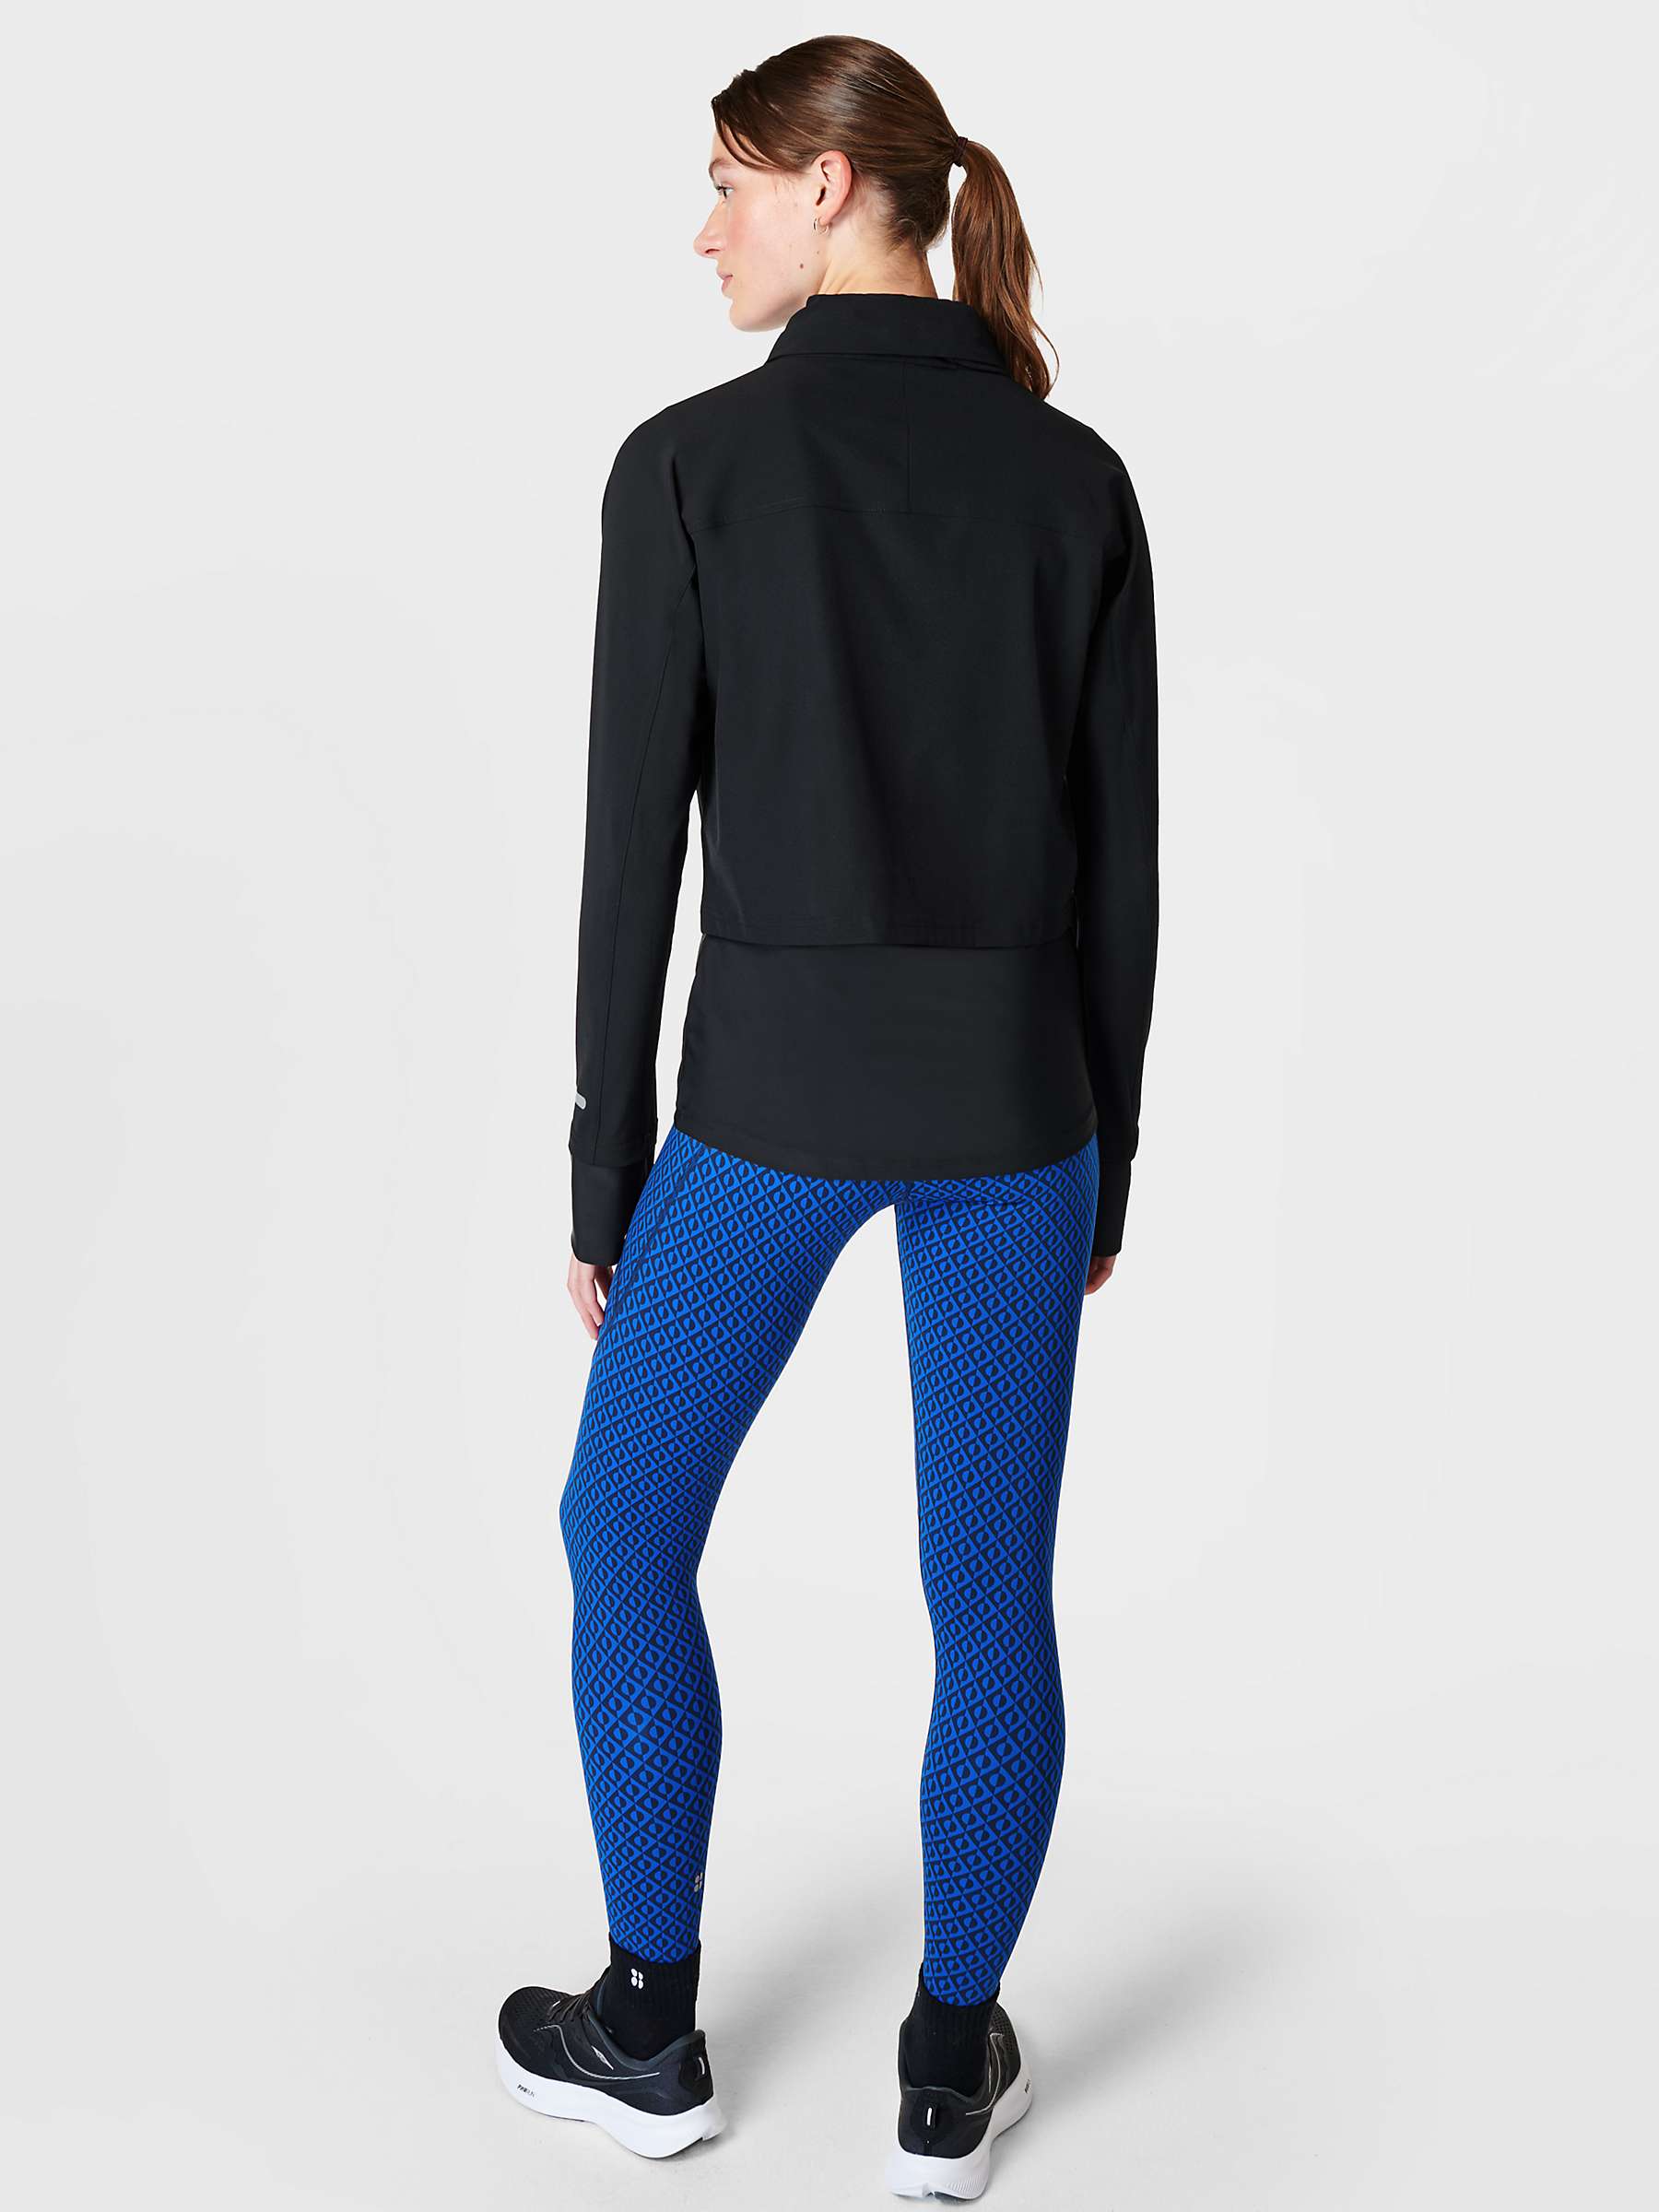 Buy Sweaty Betty Fast Track Running Jacket Online at johnlewis.com